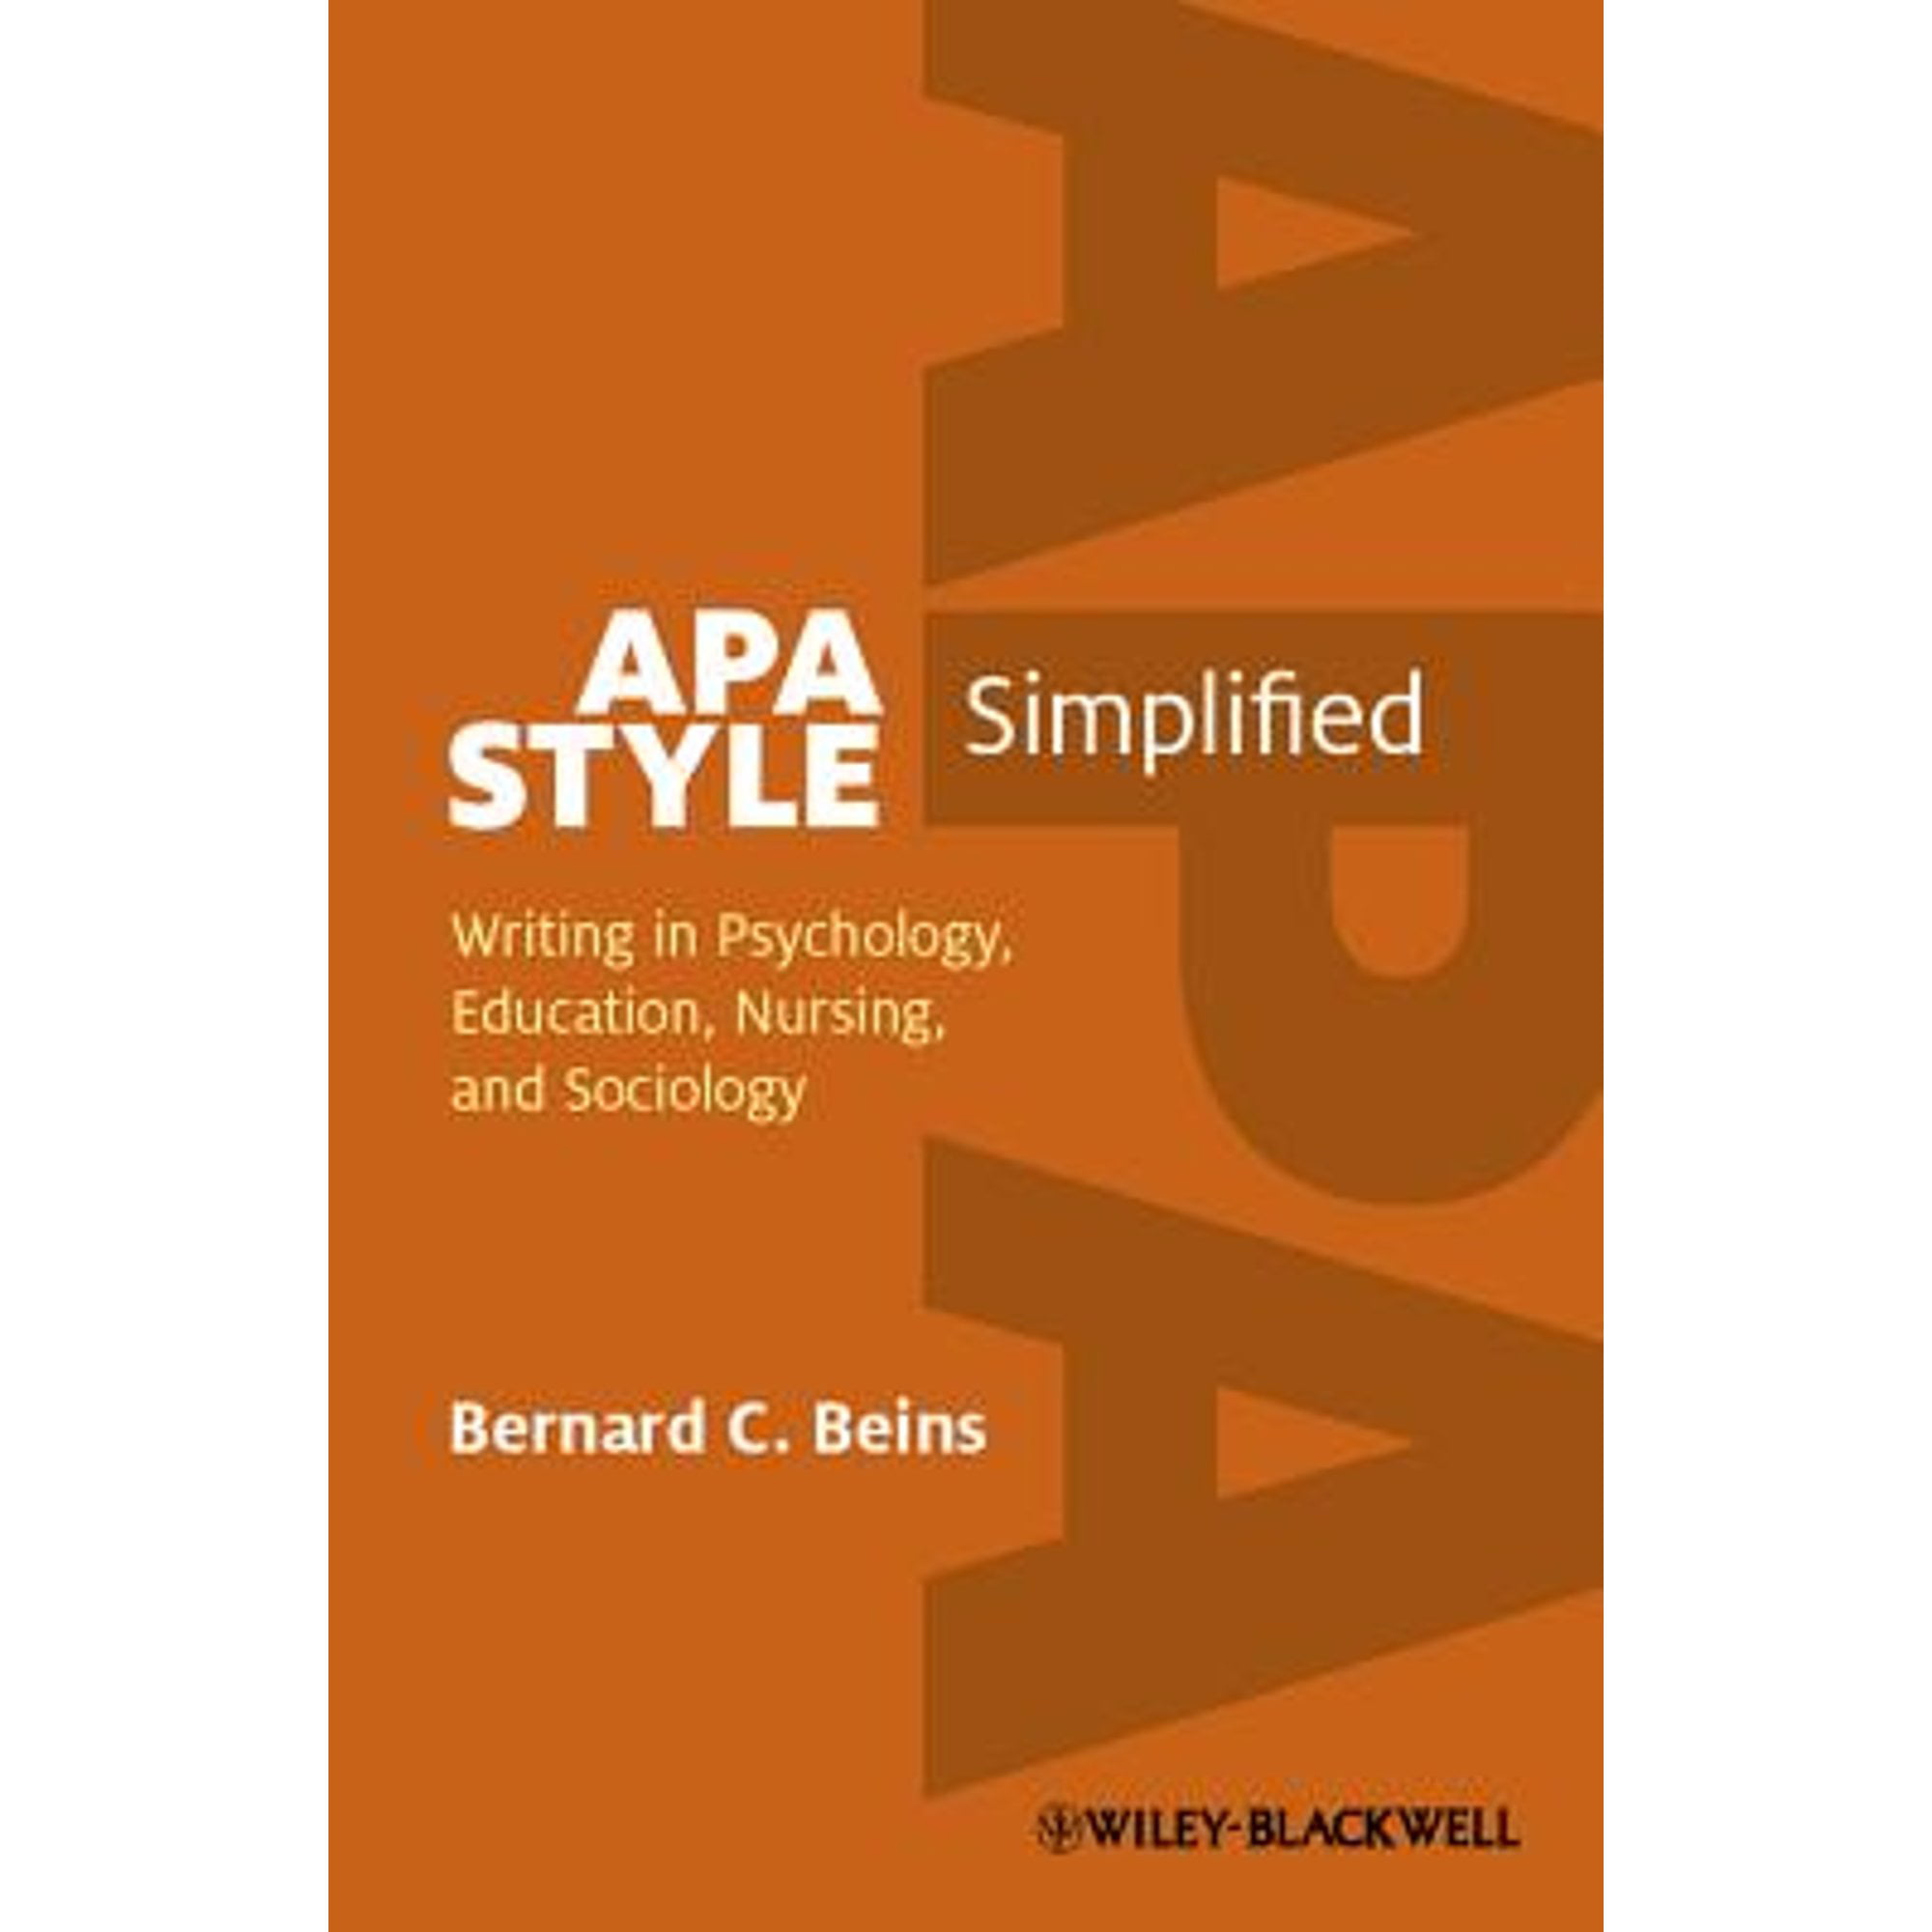 apa style simplified writing in psychology education nursing and sociology